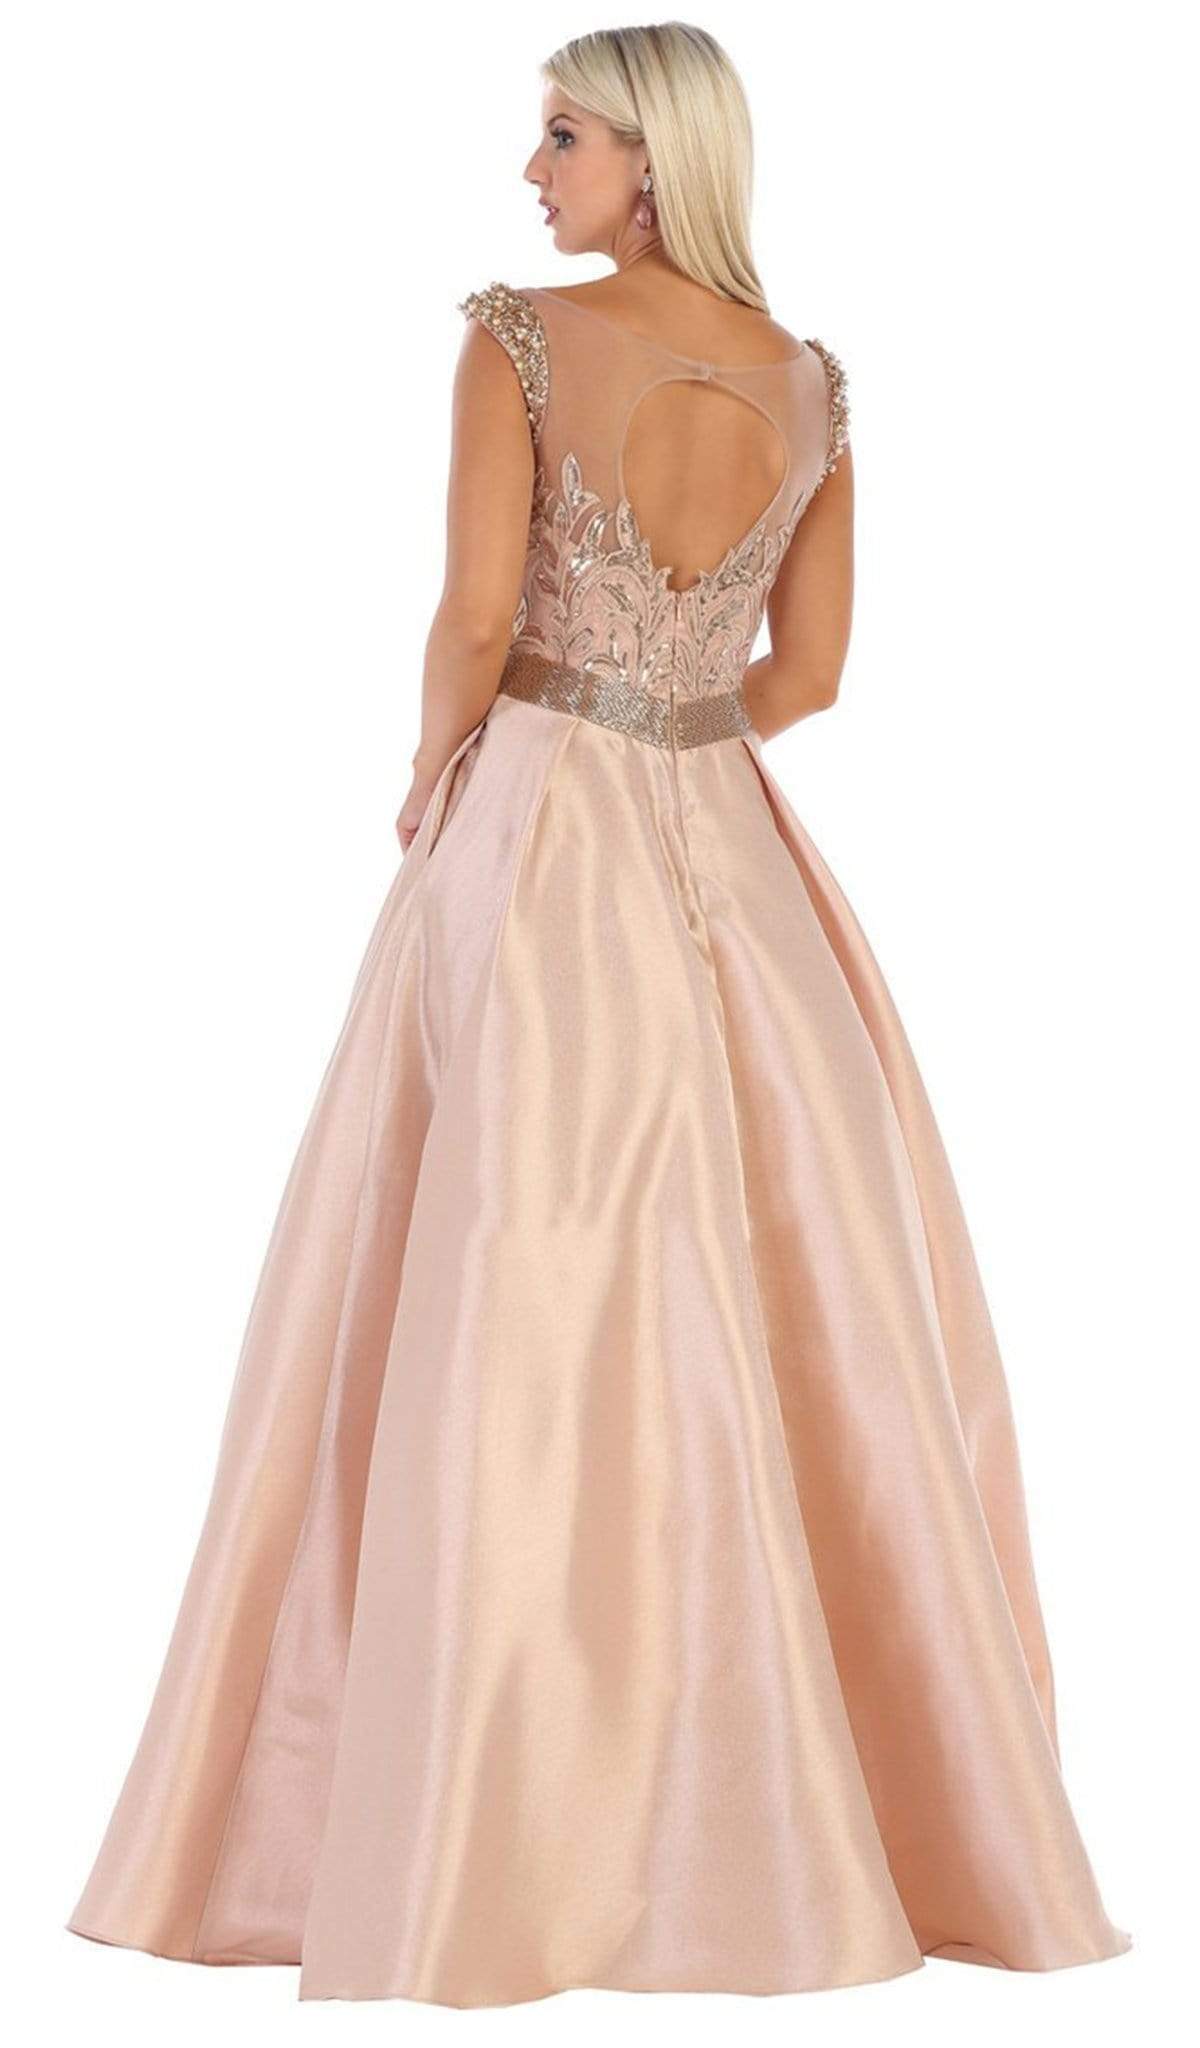 May Queen - RQ7706 Sequin Embroidered Ballgown Ball Gowns